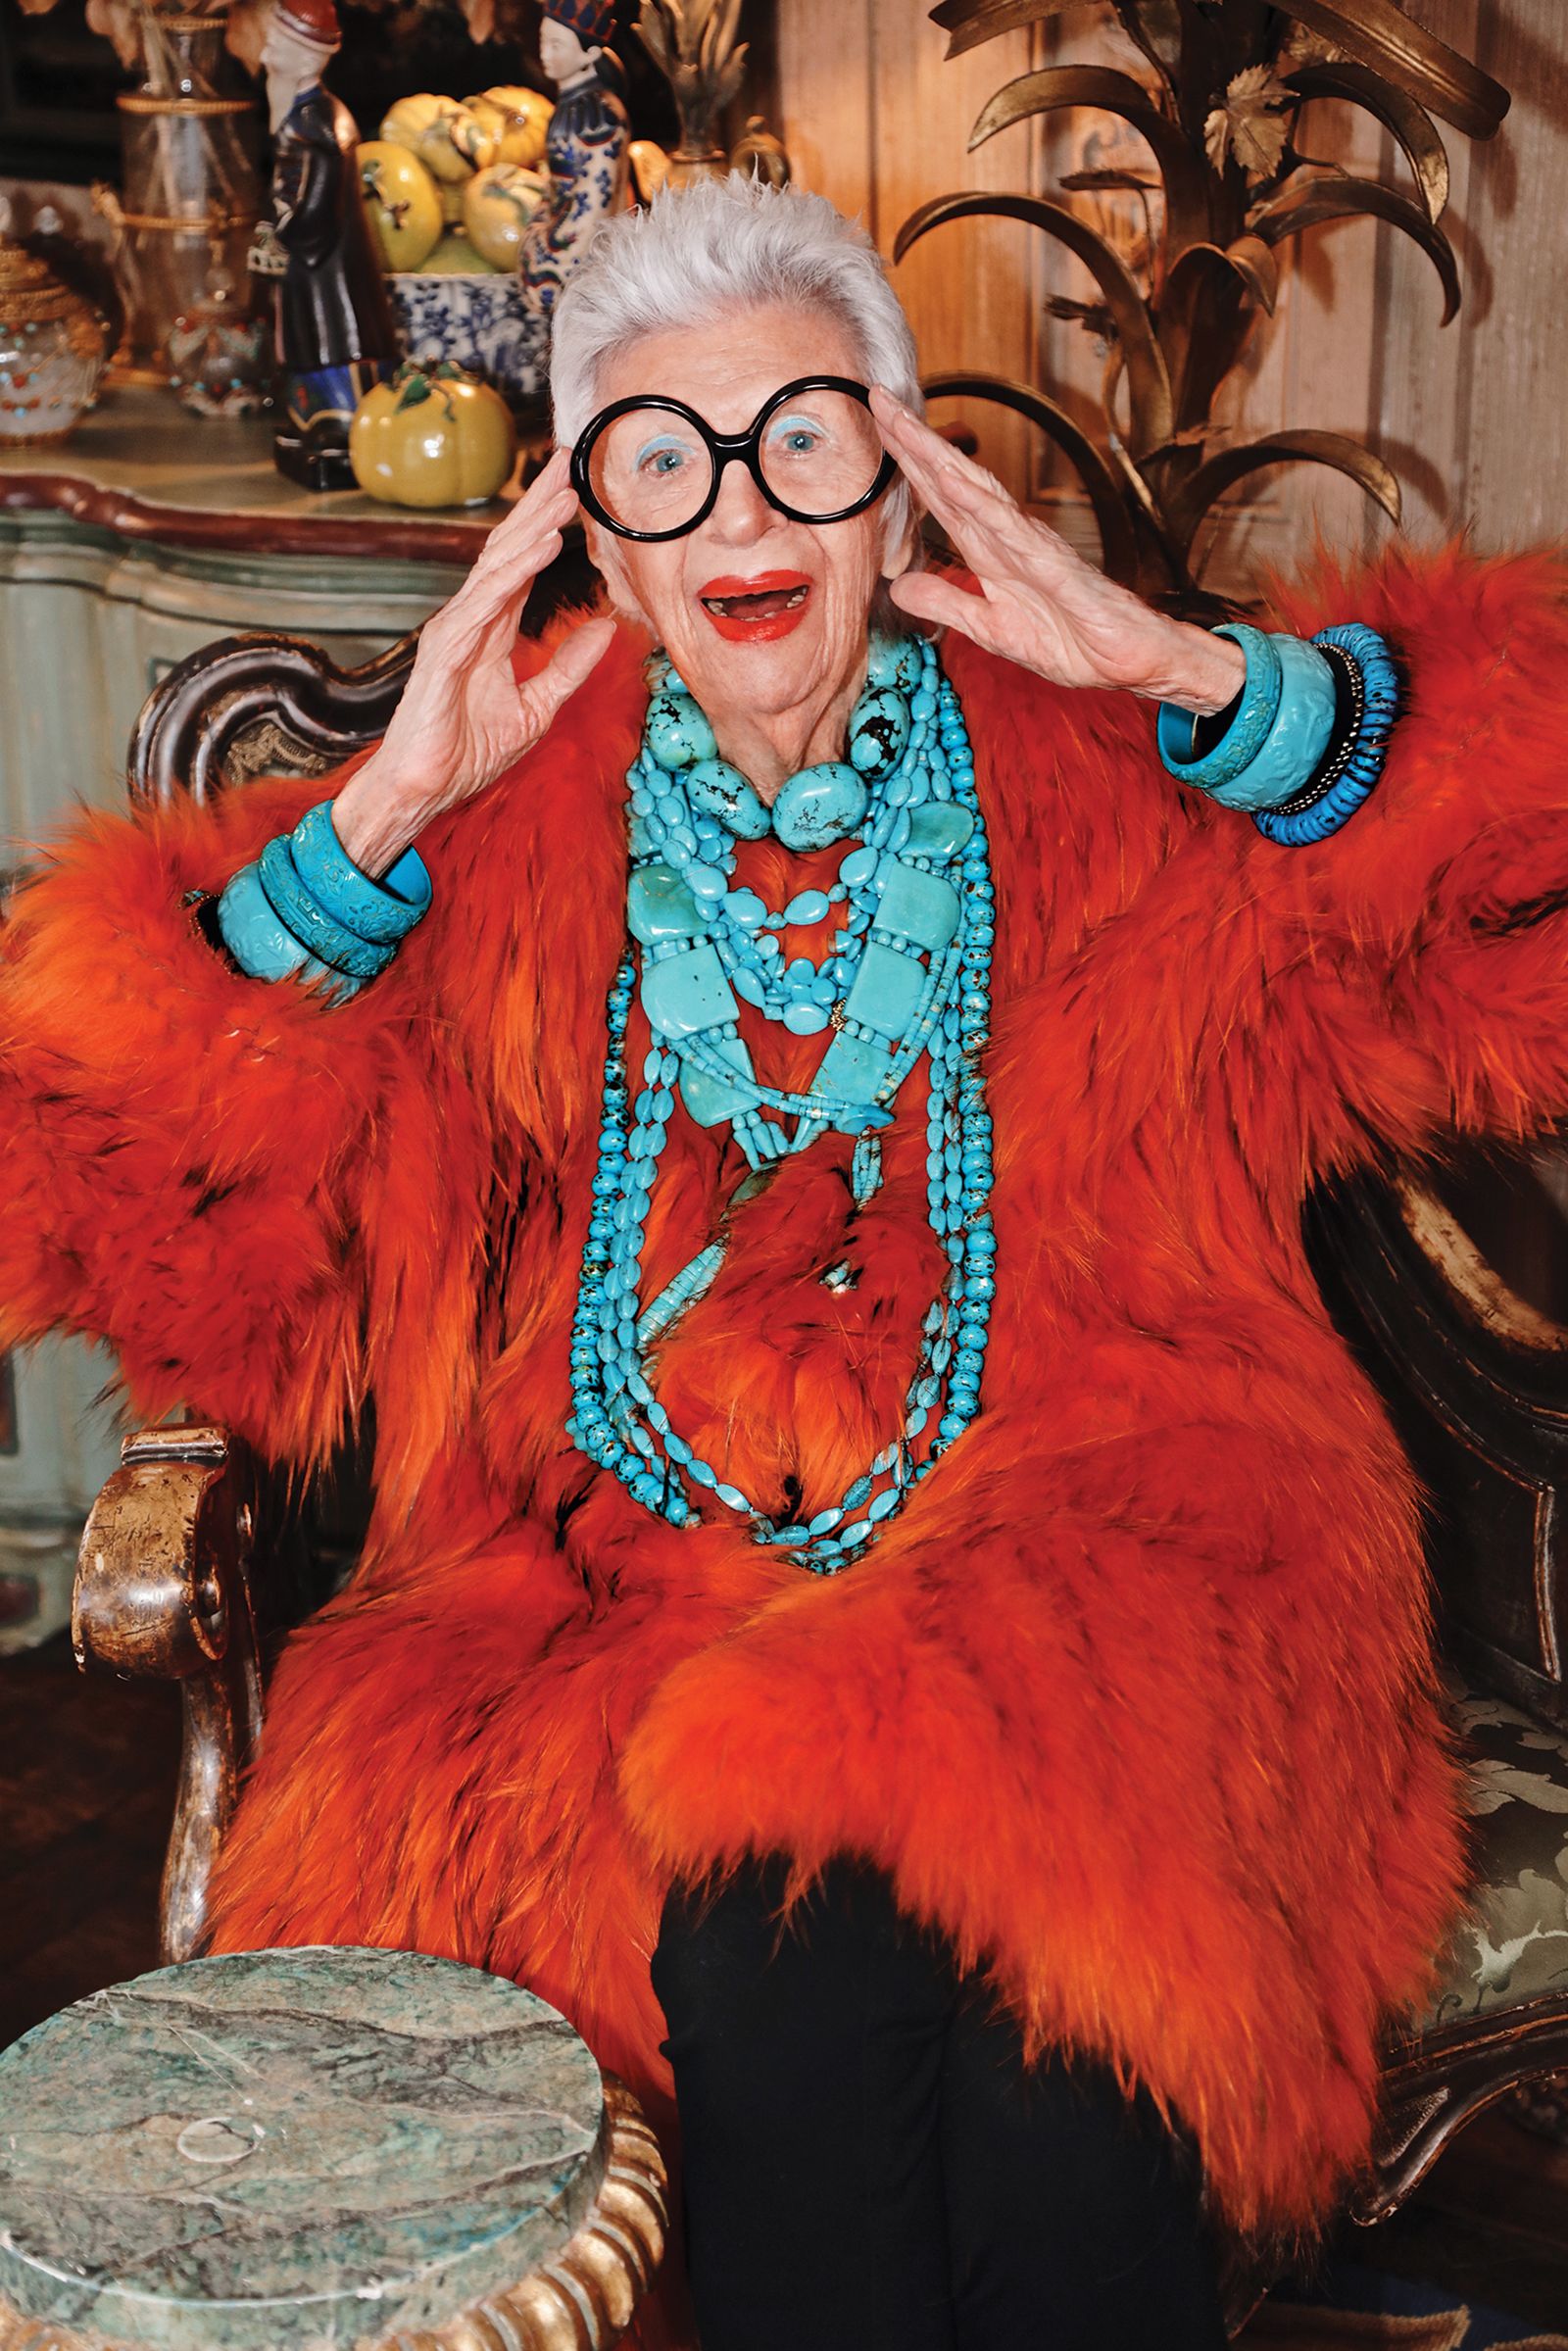 Style icon Iris Apfel, 96, is now a (wrinkle-free) Barbie doll